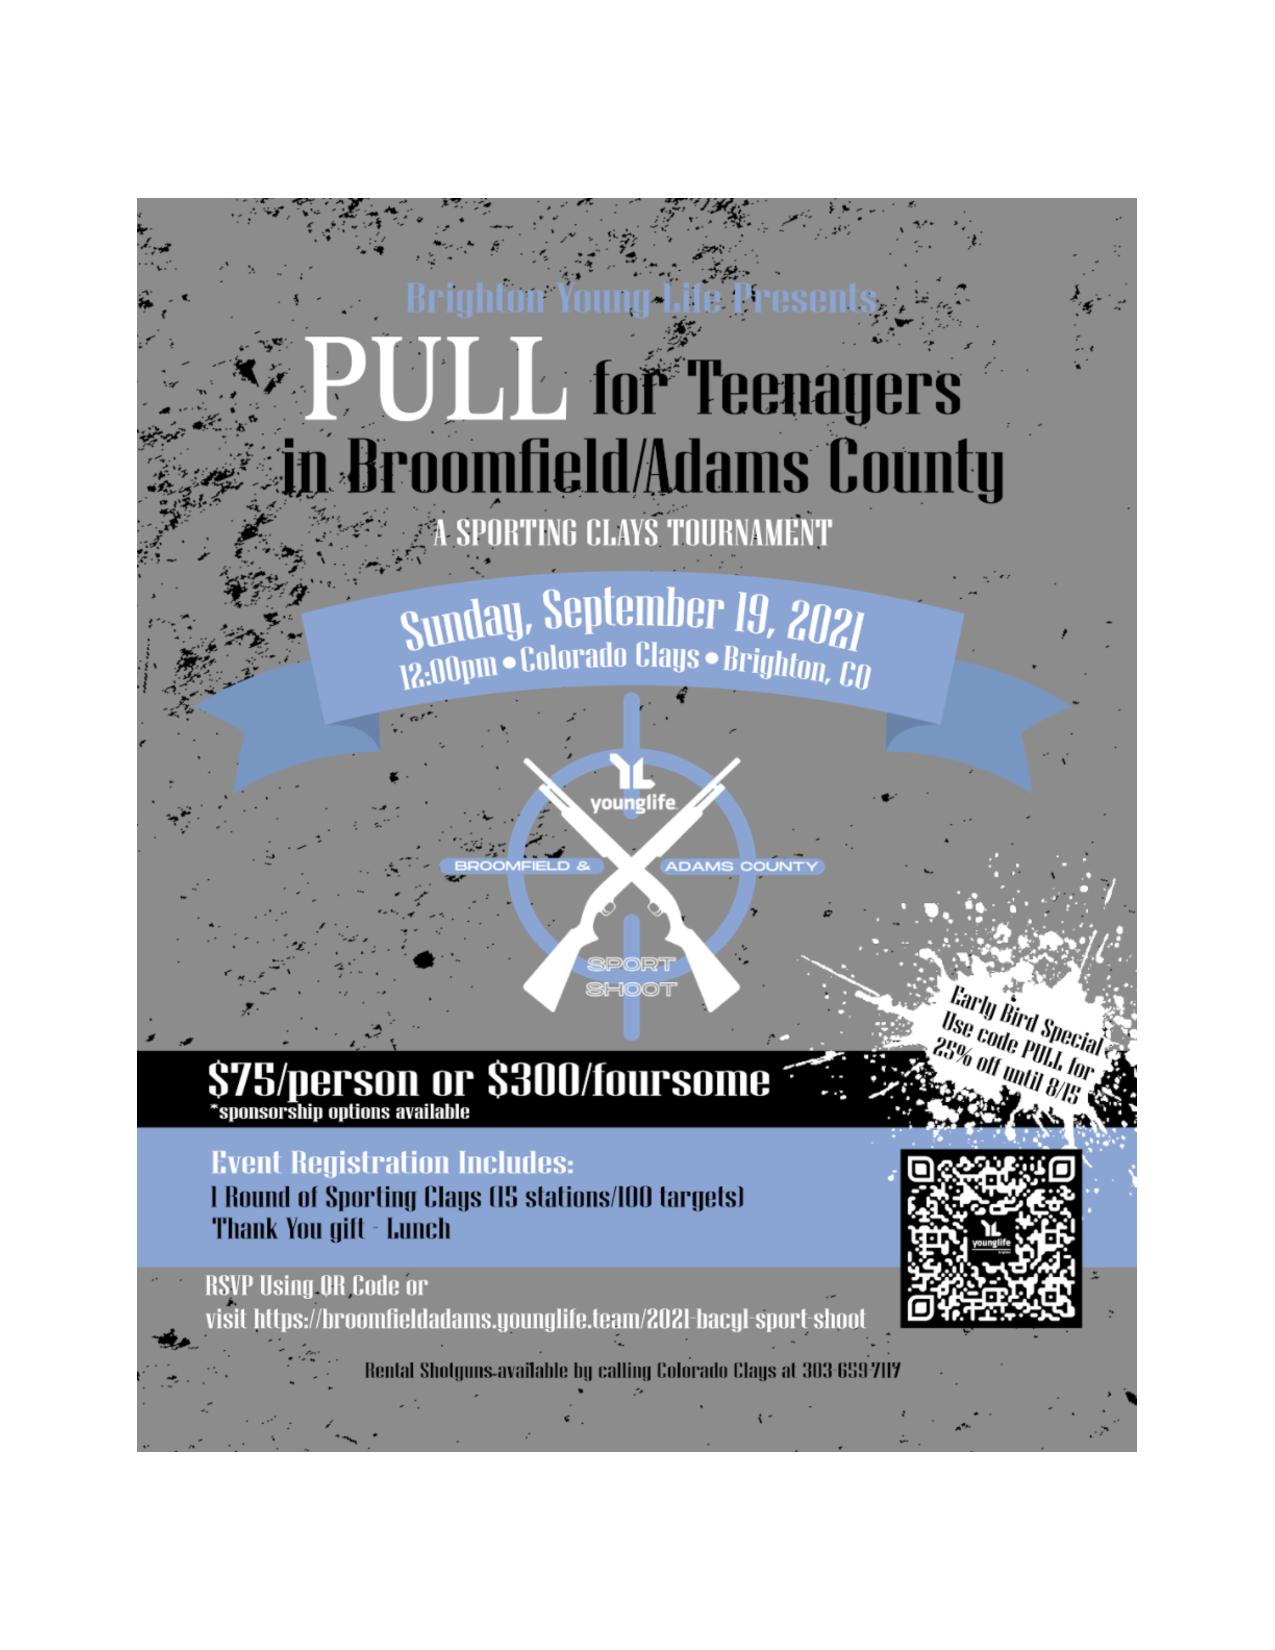 Brighton Young Life "Pull For Teenagers" Sporting Clays Fundraiser